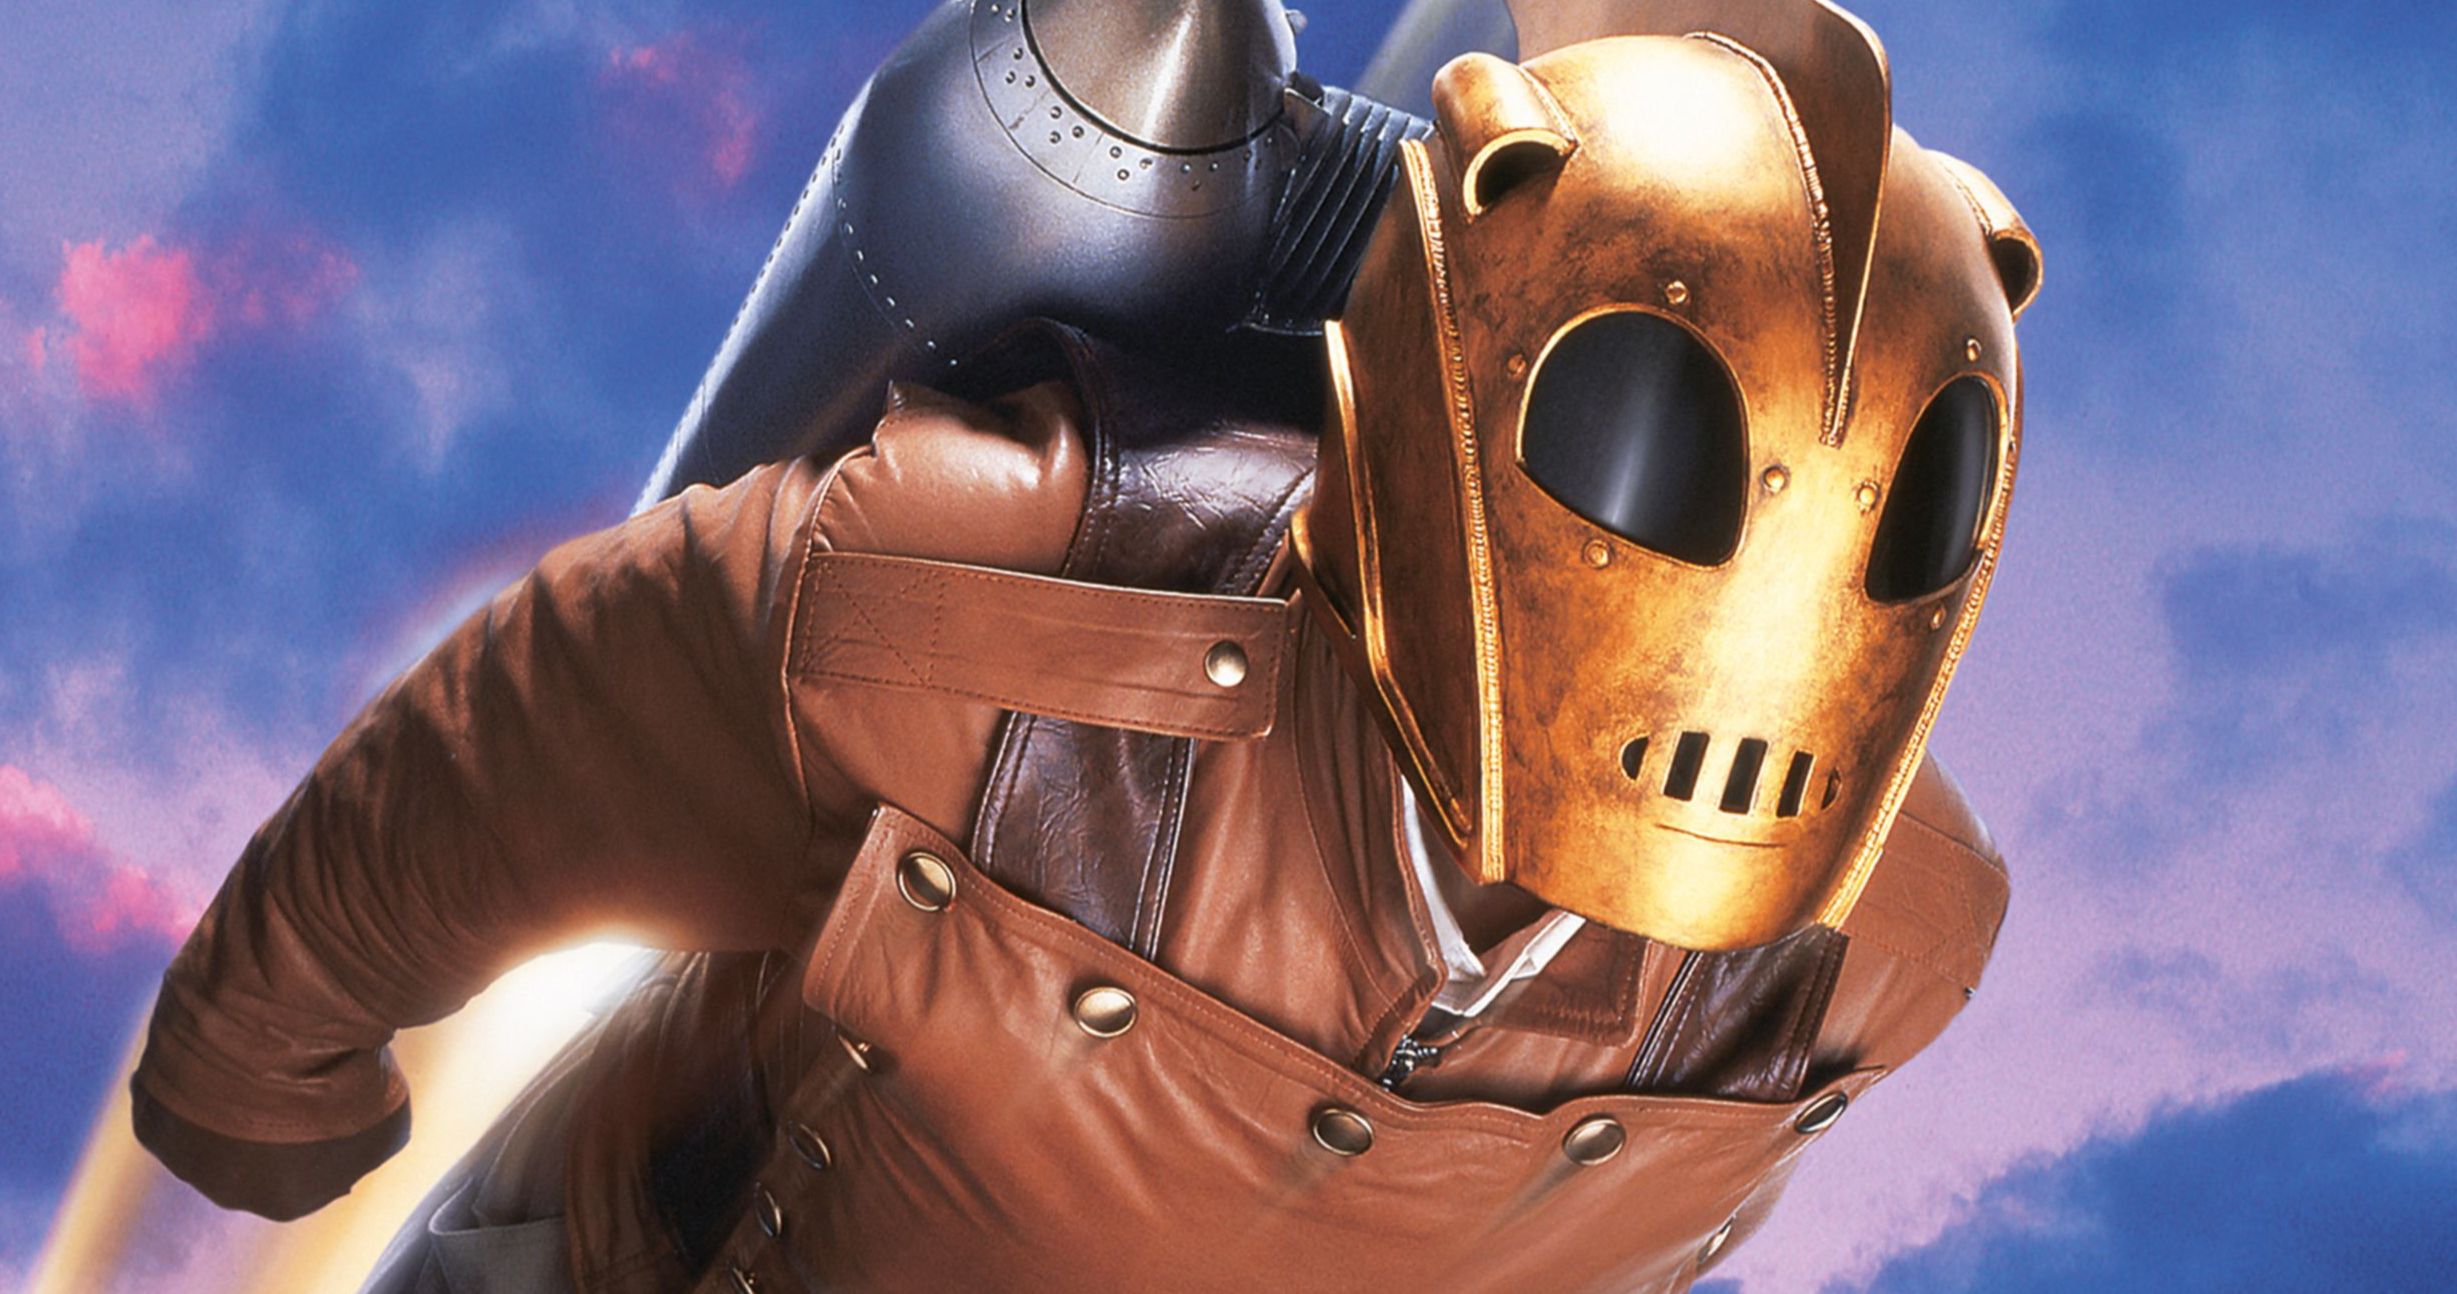 The Return of The Rocketeer Is Coming to Disney+ from Producer David Oyelowo